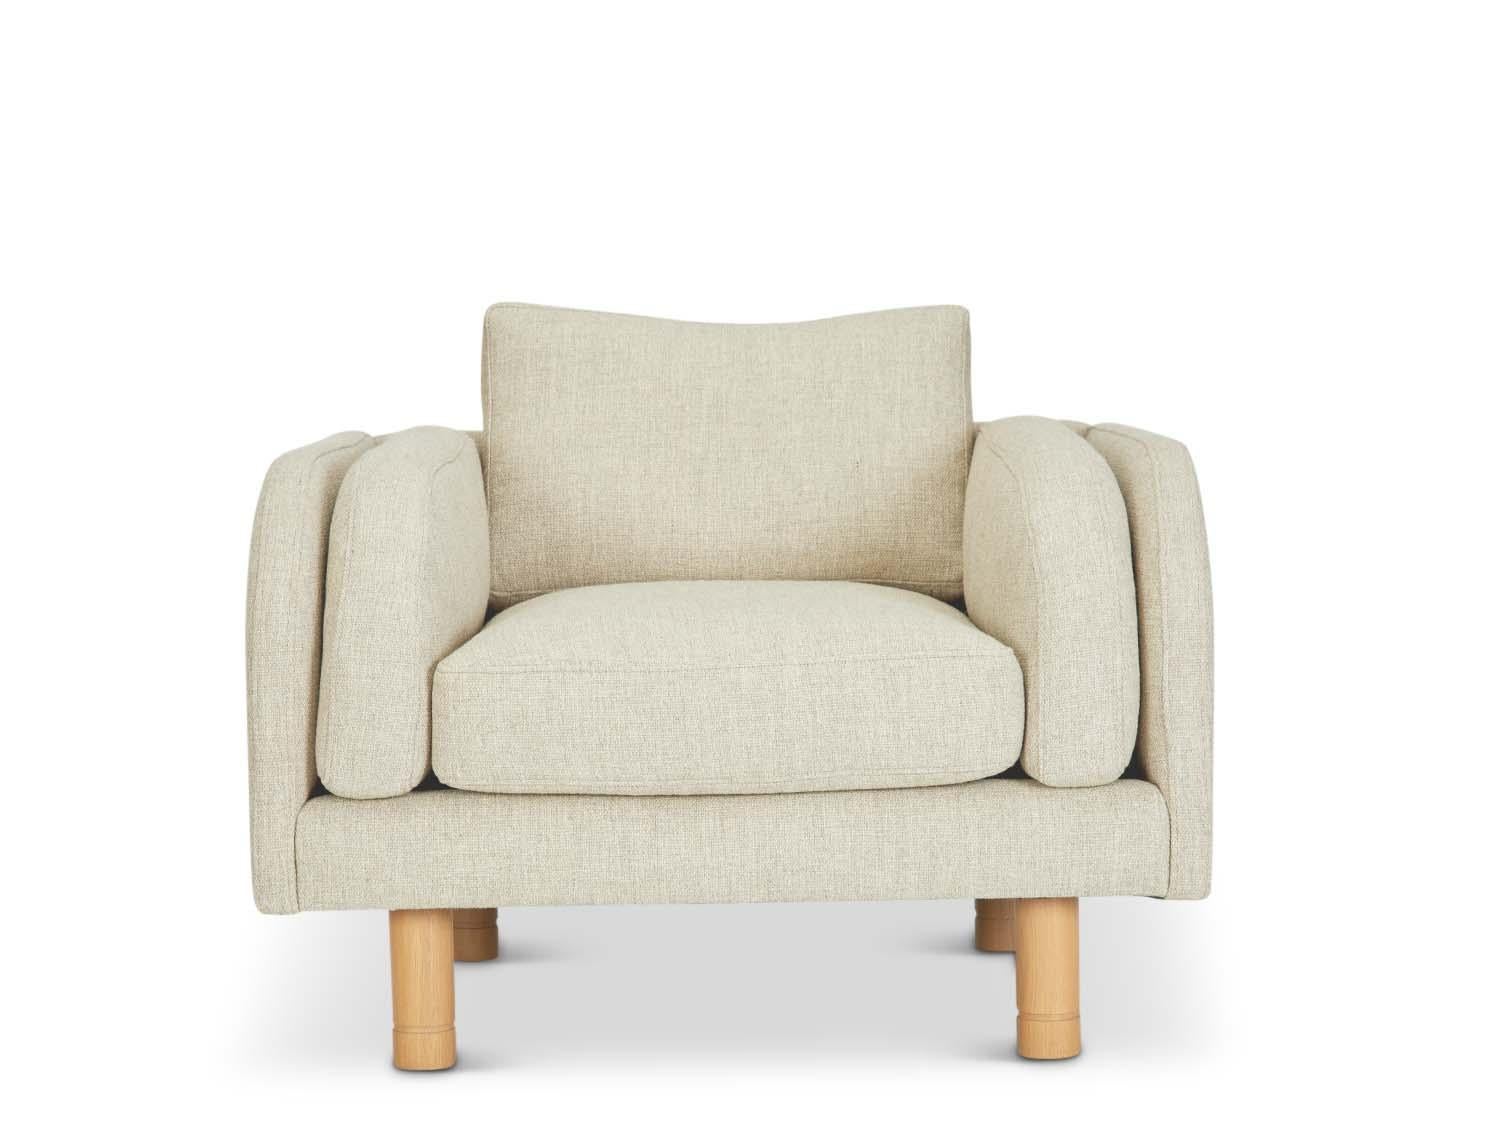 The Moreno chair sits low and deep with Italian-inspired curved arms. The chair features loose seat and back cushions and two side cushions that mimic the curvature of the arms. The legs have an incised detail and are made of solid American walnut